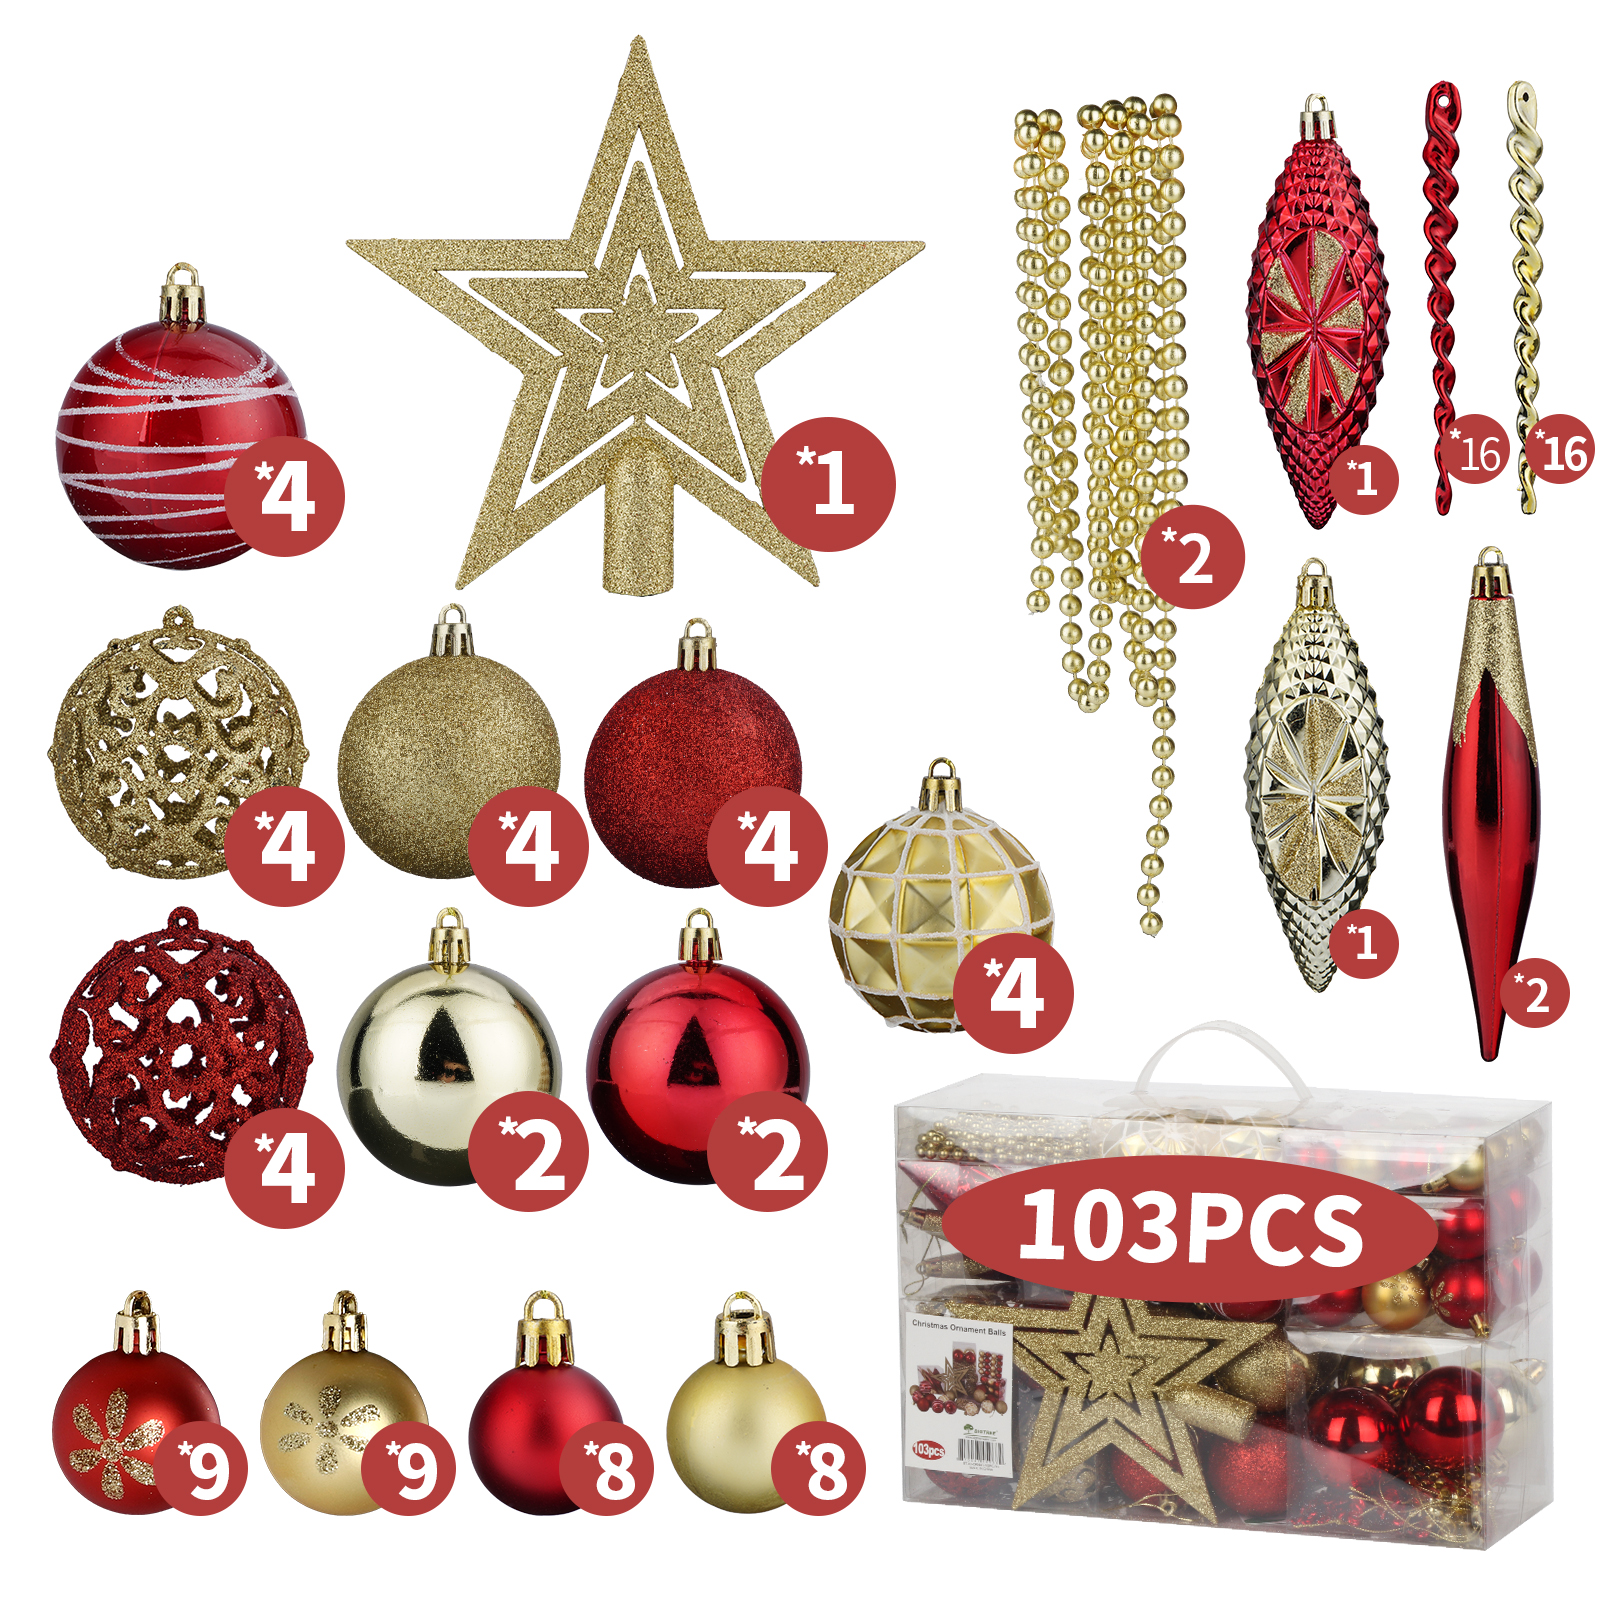 Christmas Balls Ornaments Shatterproof Christmas Tree Decoration Holiday Decoration 103 Pieces - image 1 of 11